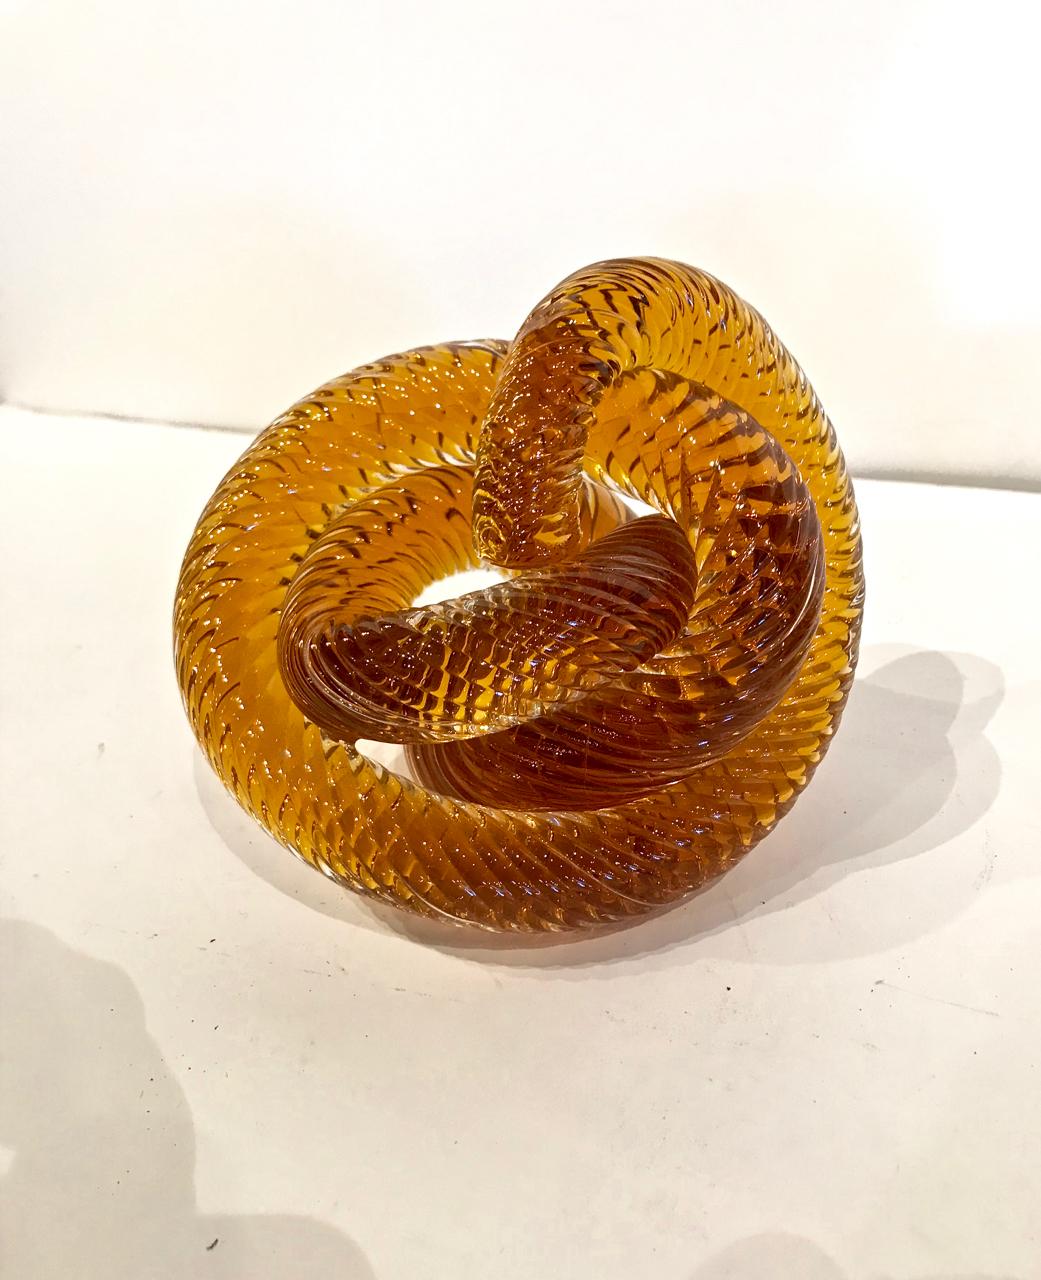 This is a highly decorative pair of Murano glass knots attributed to to Zanetti. Both knots are moth blown in a deep amber or root beer glass tone. The ribbed surface attracts and reflects light--making this pair great eye-catchers.